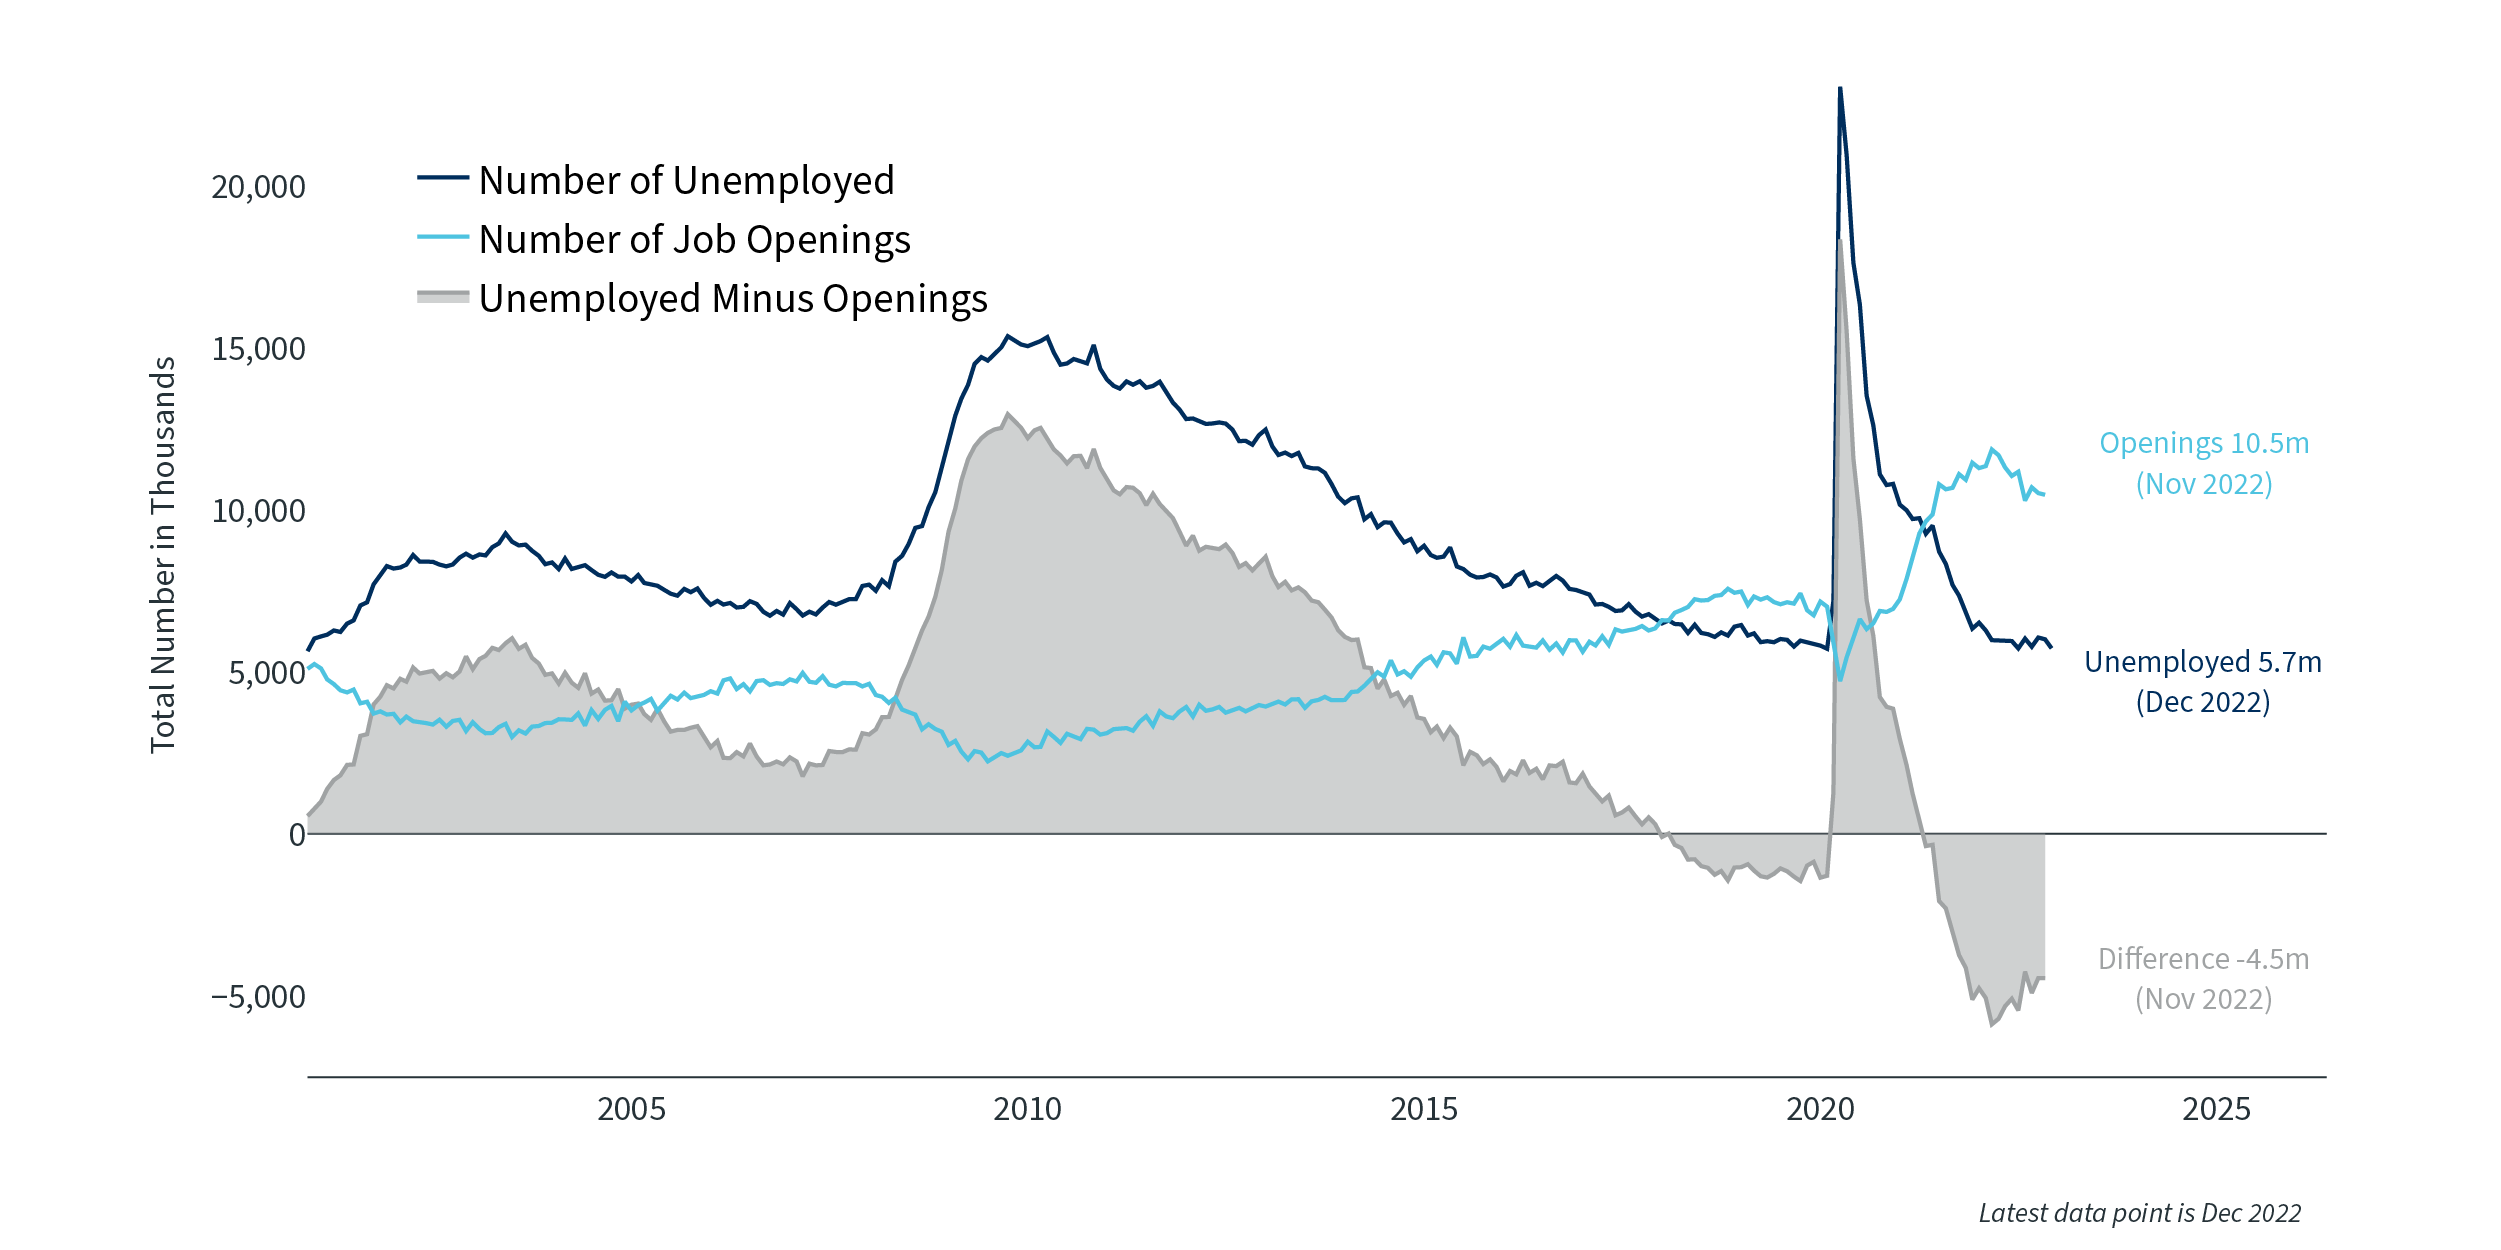 Image > Unemployment and job openings > q1 2023 market update